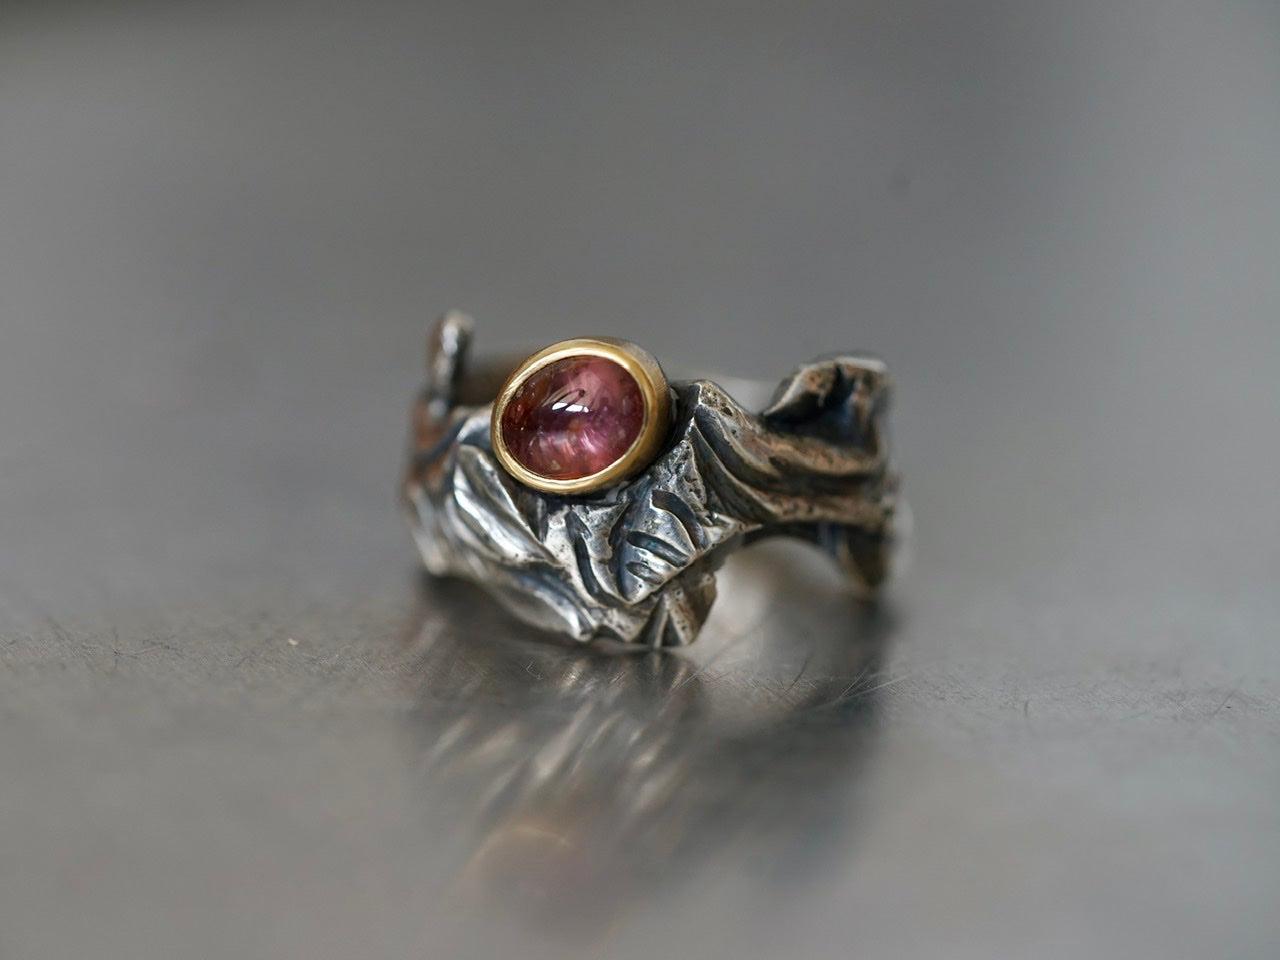 Carved sapphire ring, size 8.75